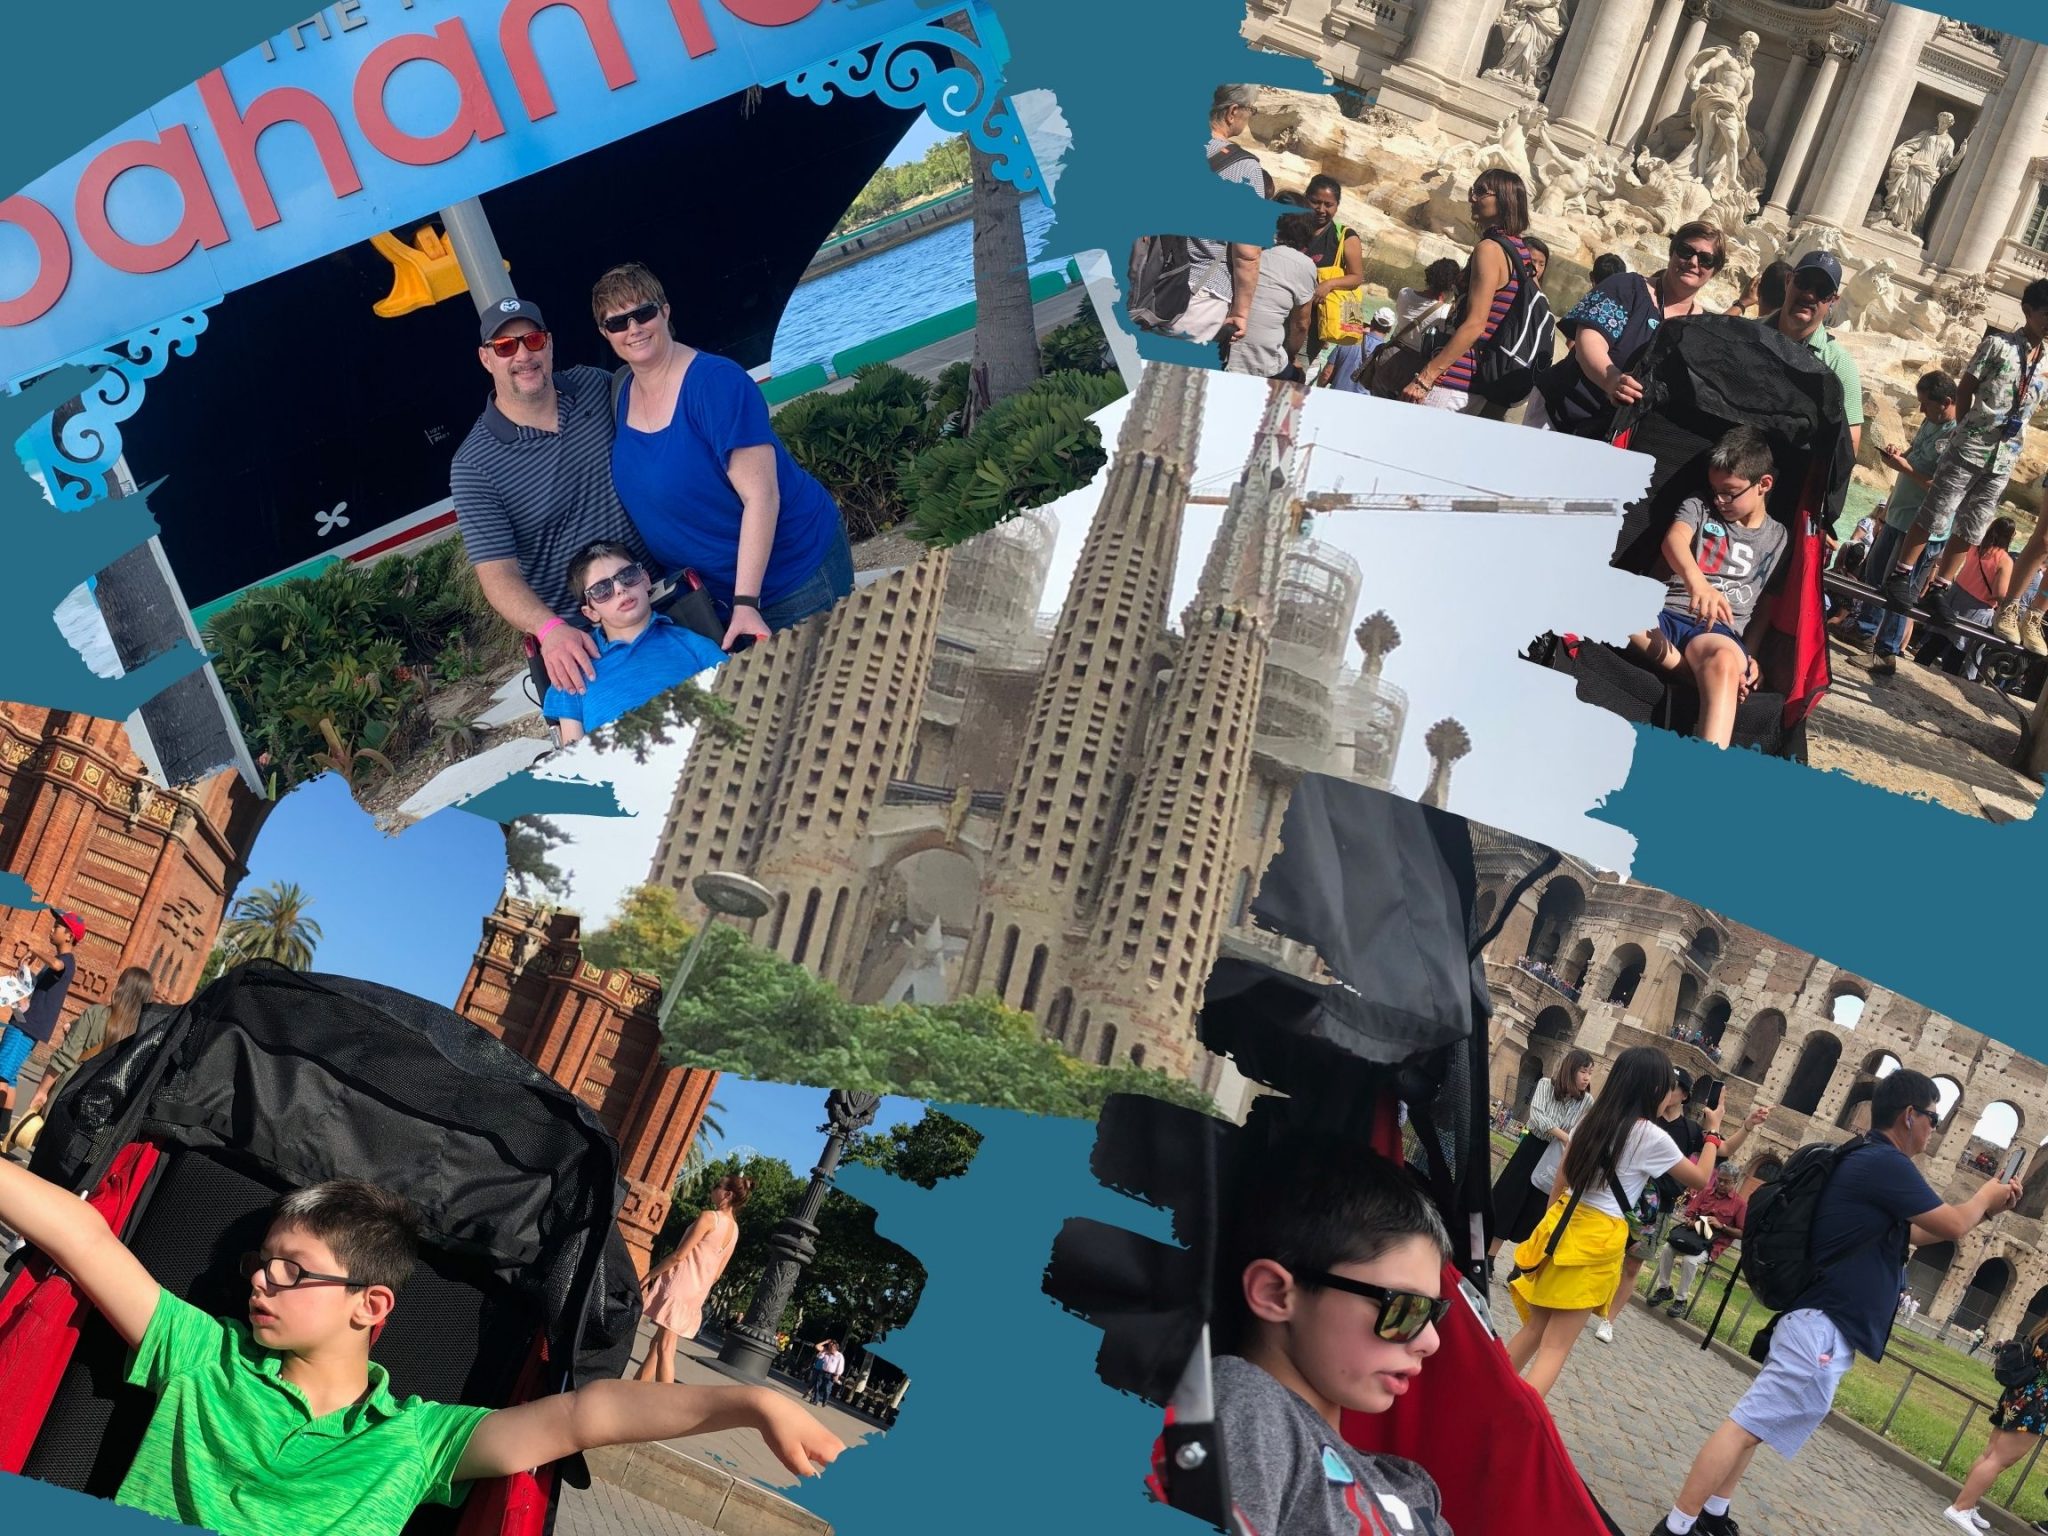 multiple family photos of youth and caucasian parents at the Coliseum and Trevi Fountain in Rome, la sagrada familia in barcelona, and in front of a Barcelona sign